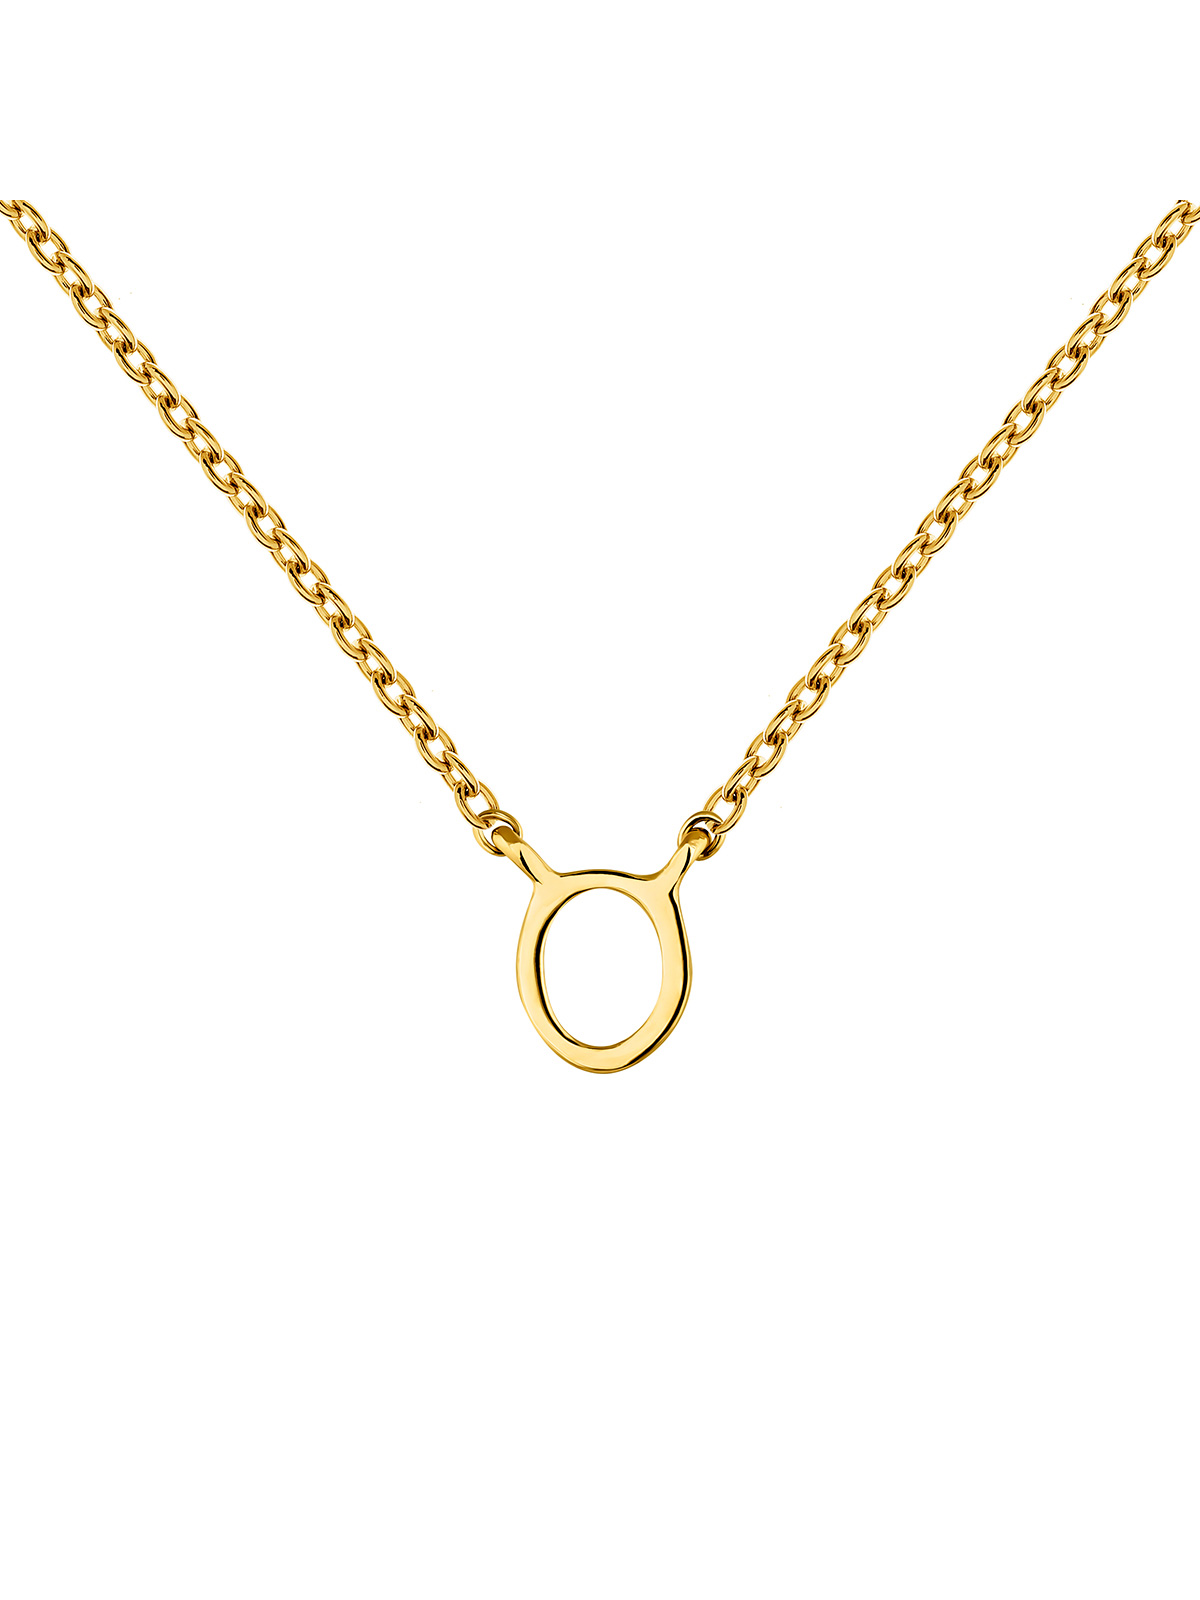 Collier initiale O or , J04382-02-O, mainproduct